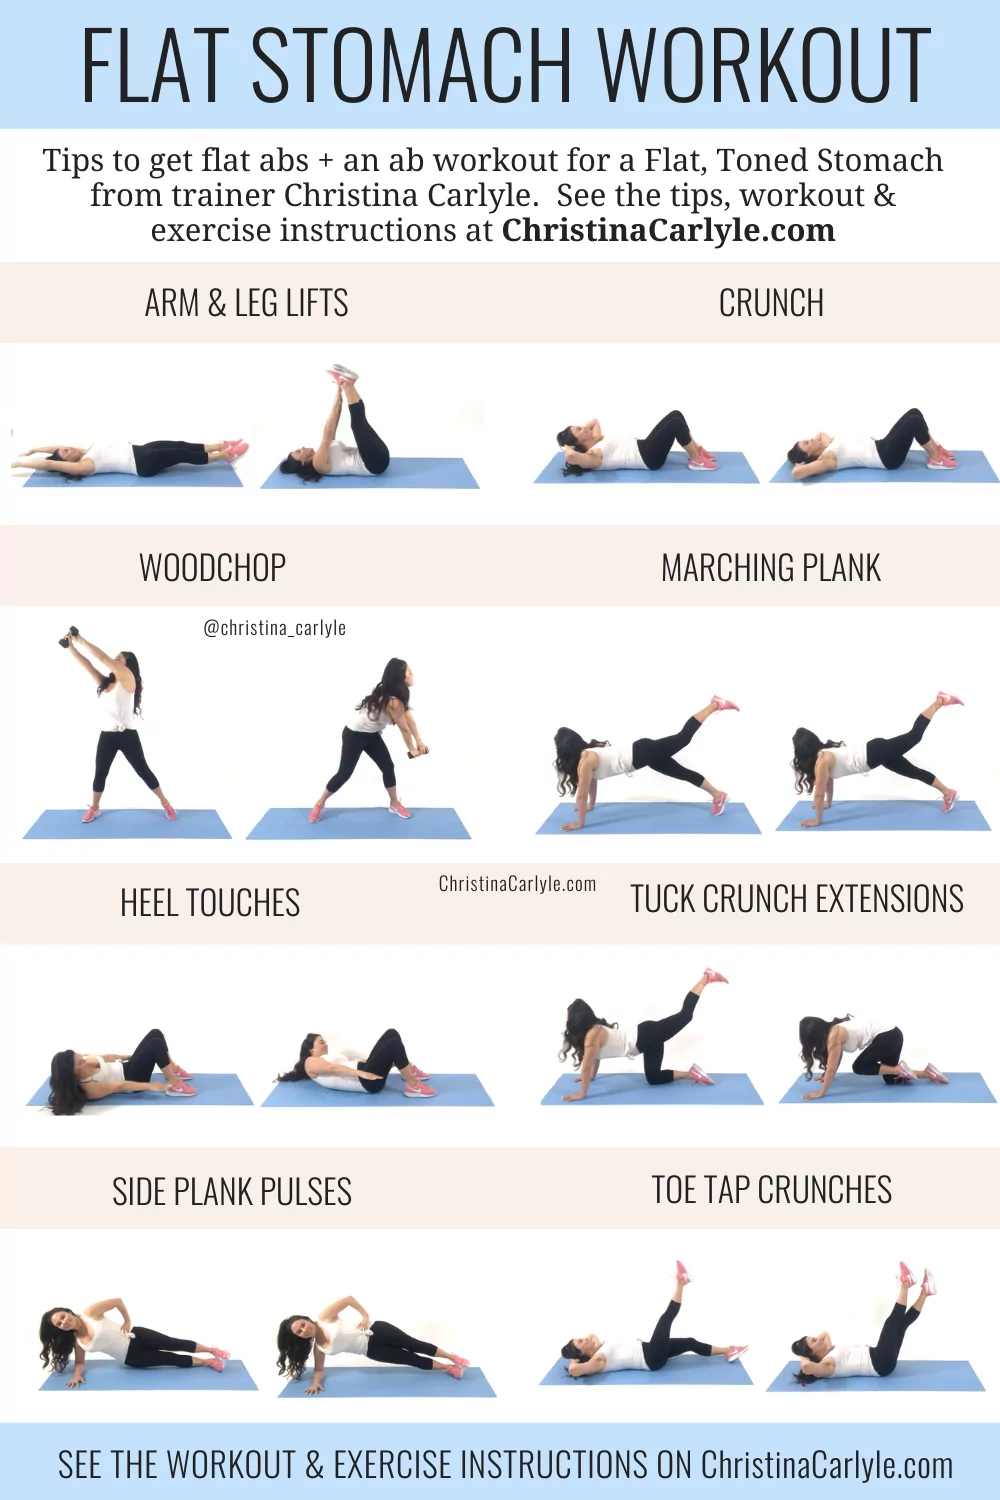 Flat Stomach Workout for Women that want Flat, Toned Abs